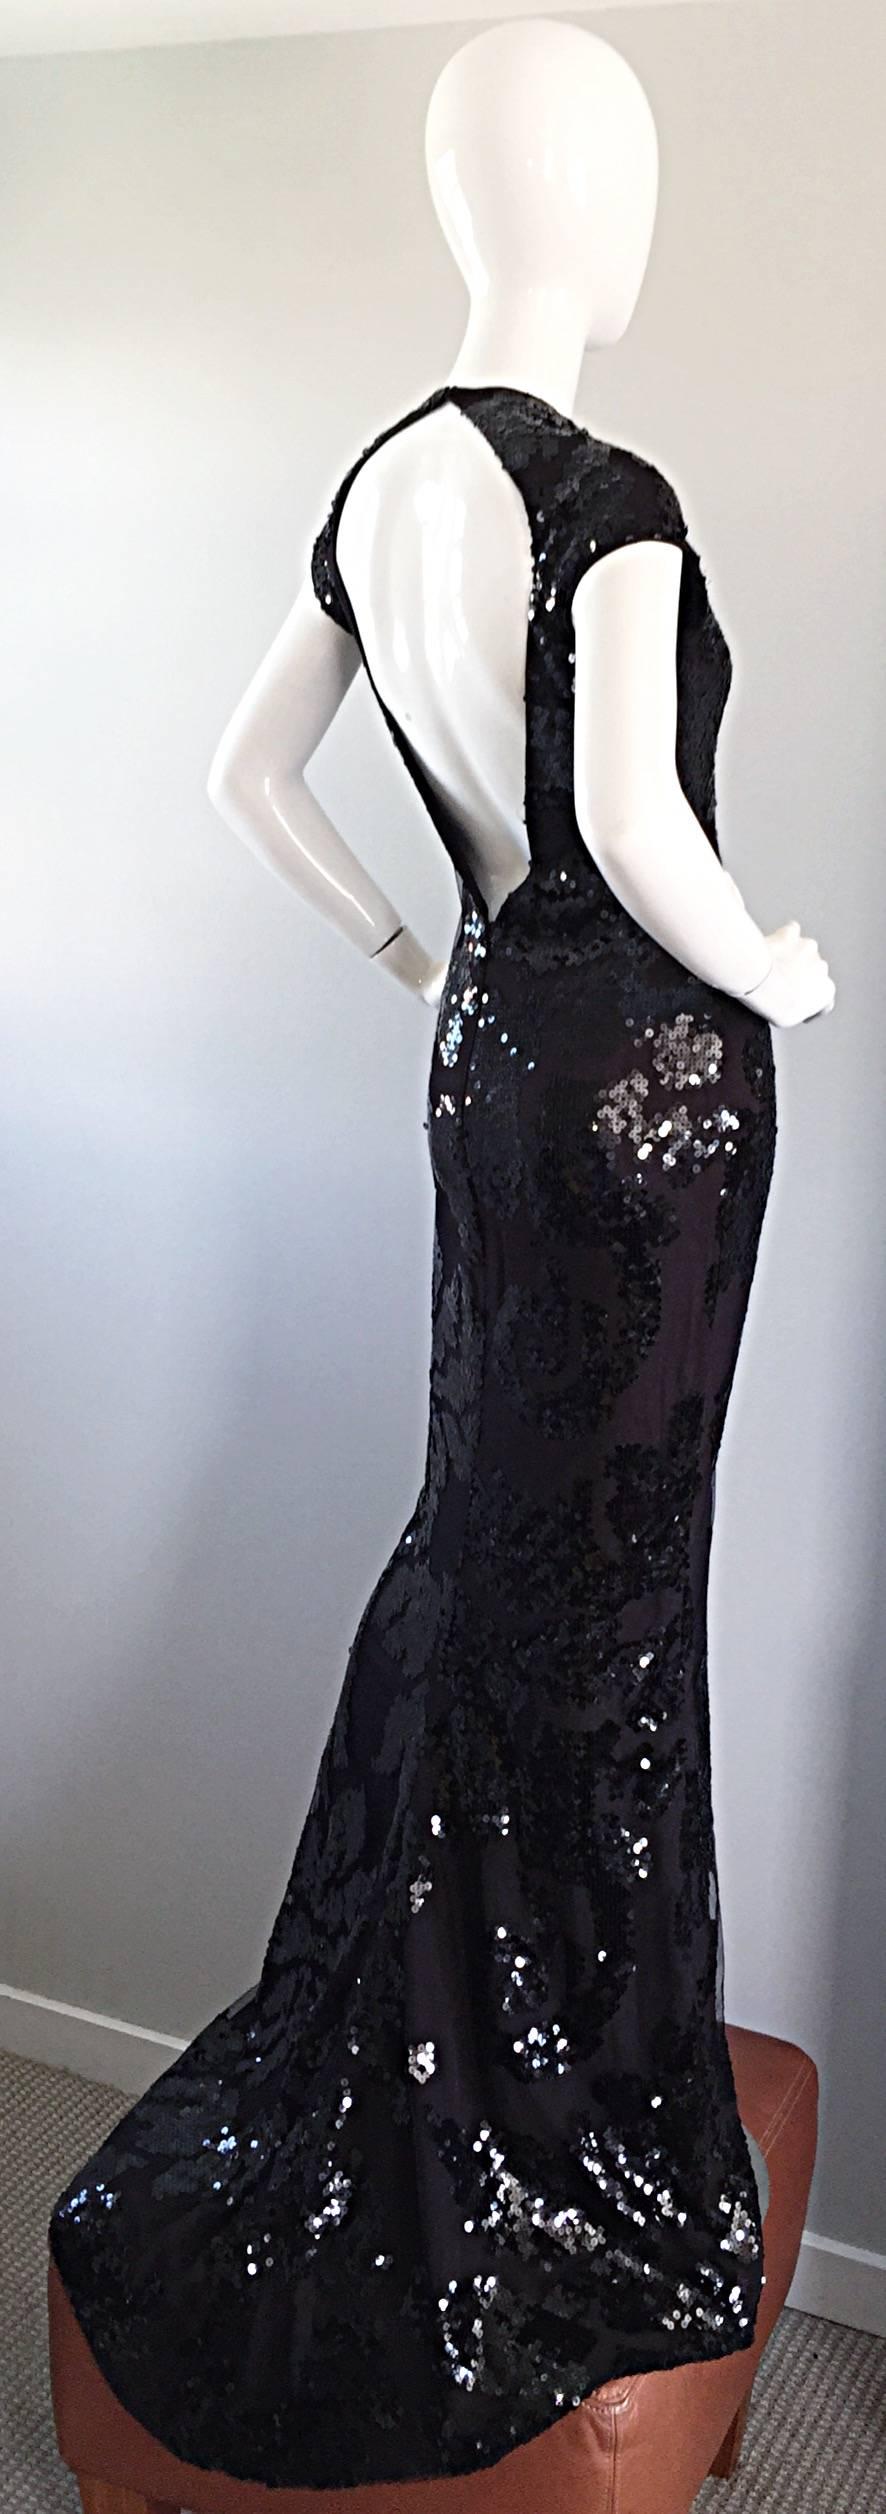 Halston NWT $12k Vintage Size 6 Open Back Black Silk Sequin Gown Dress In New Condition For Sale In San Diego, CA